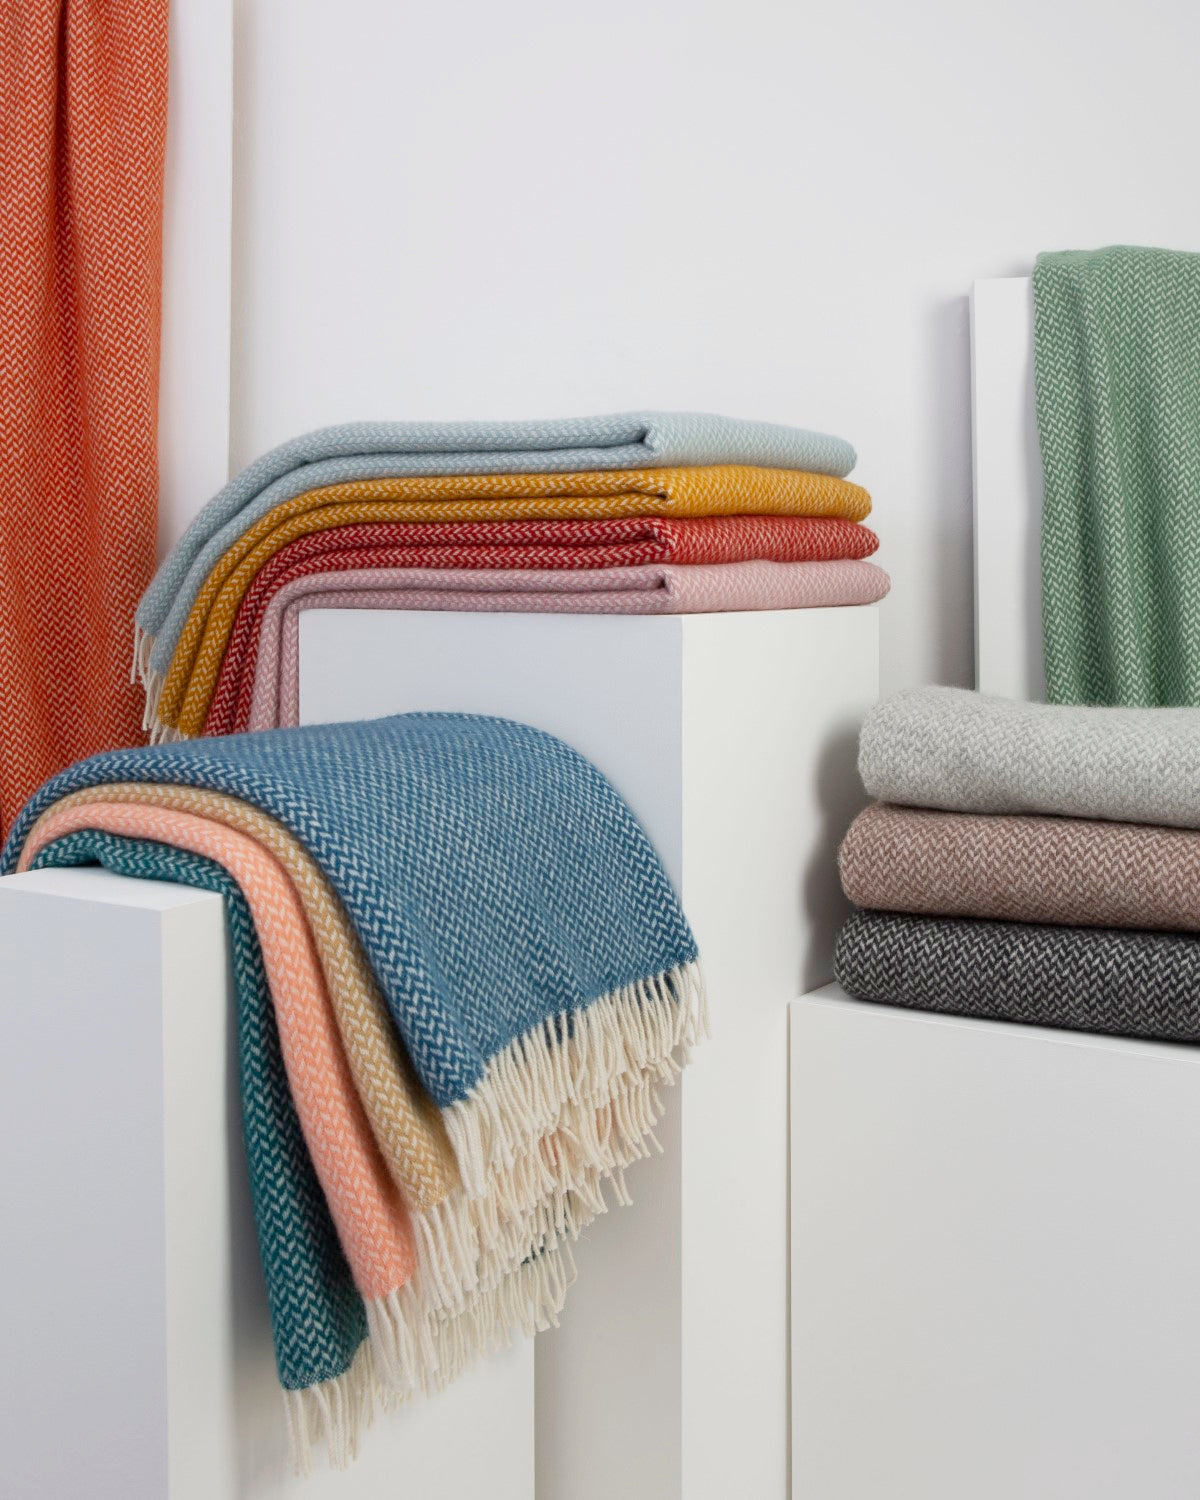 Several folded wool throws stacked on display plinths.